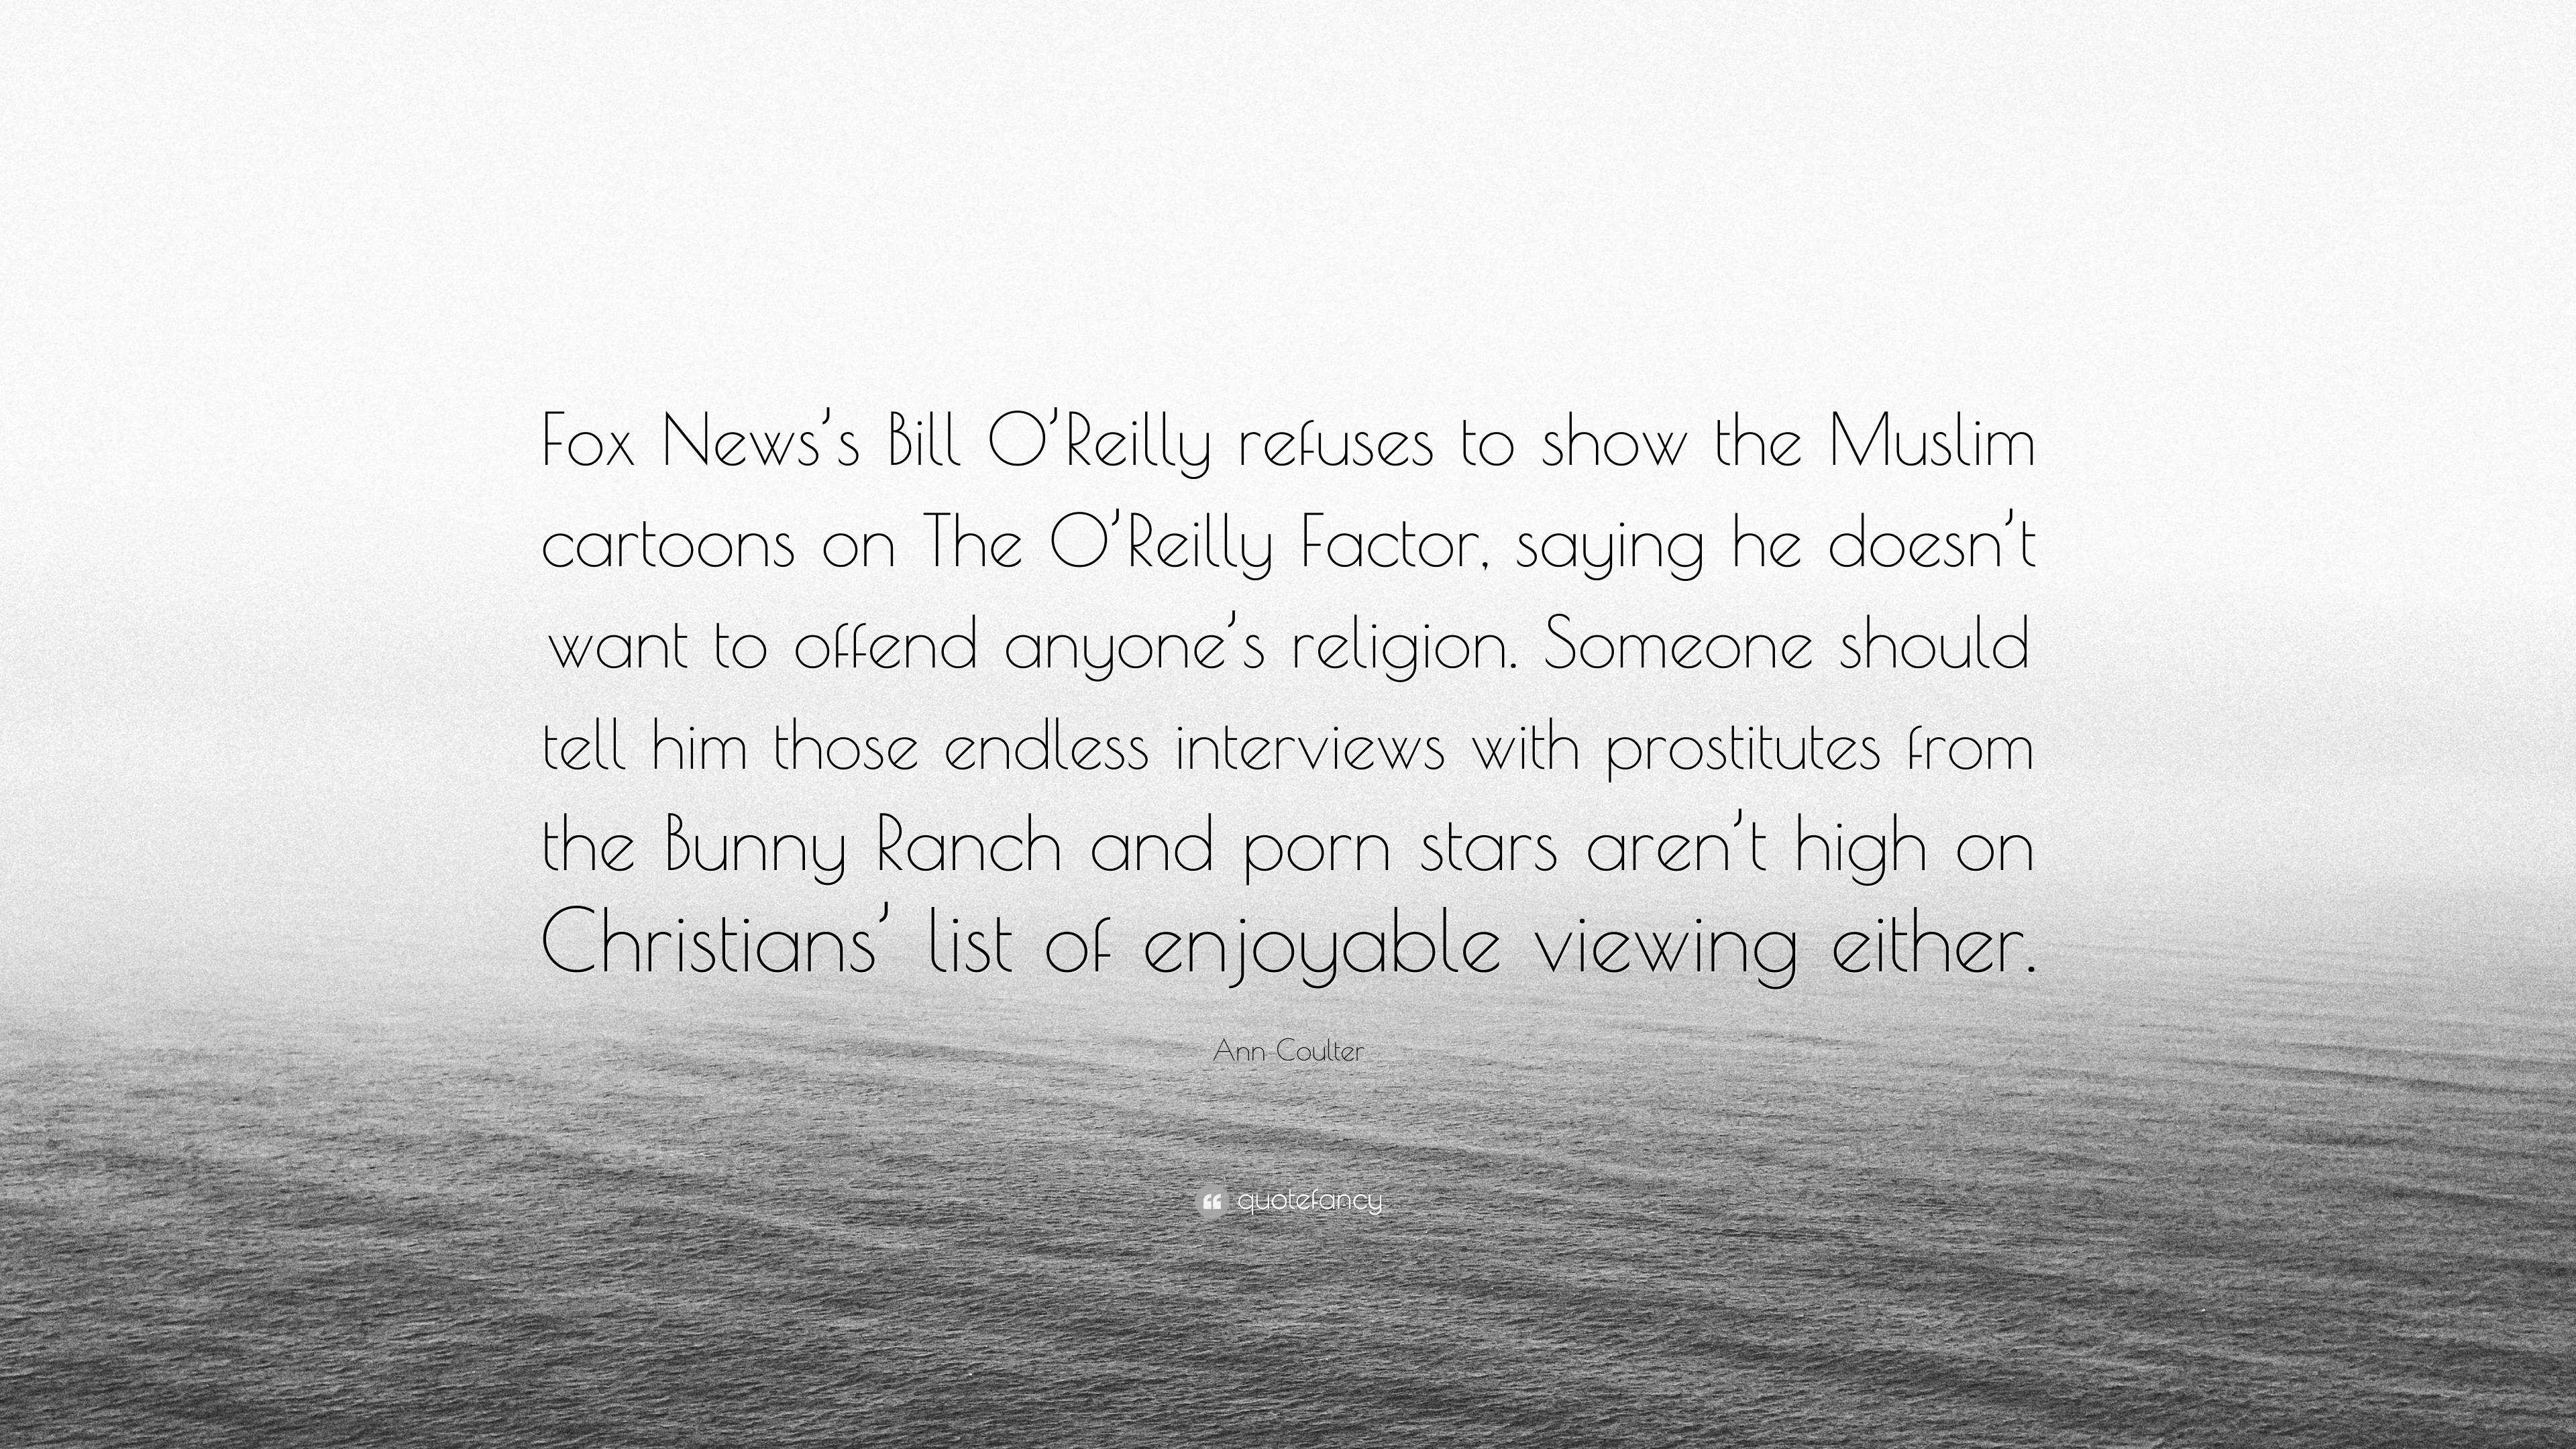 Ann Coulter Quote: â€œFox News's Bill O'Reilly refuses to show the Muslim  cartoons on The O'Reilly Factor, saying he doesn't want to offend an...â€